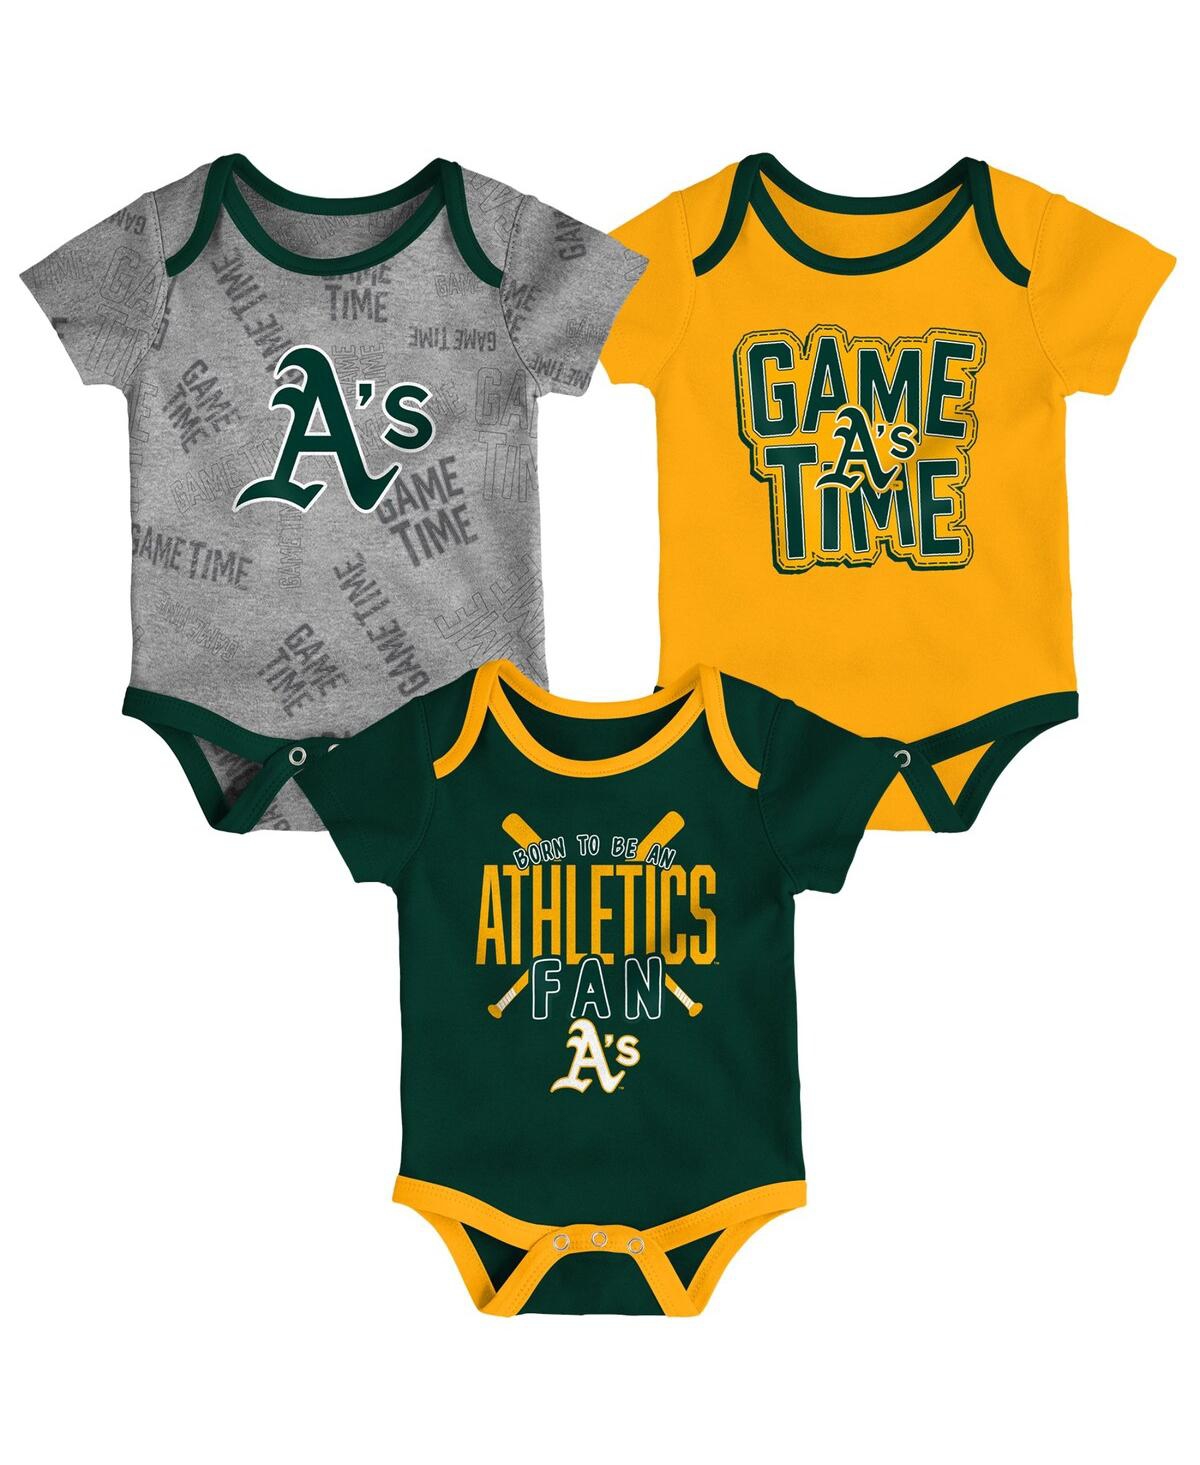 Outerstuff Babies' Newborn And Infant Boys And Girls Oakland Athletics Green, Gold, Heathered Gray Game Time Three-piec In Green,gold,heathered Gray